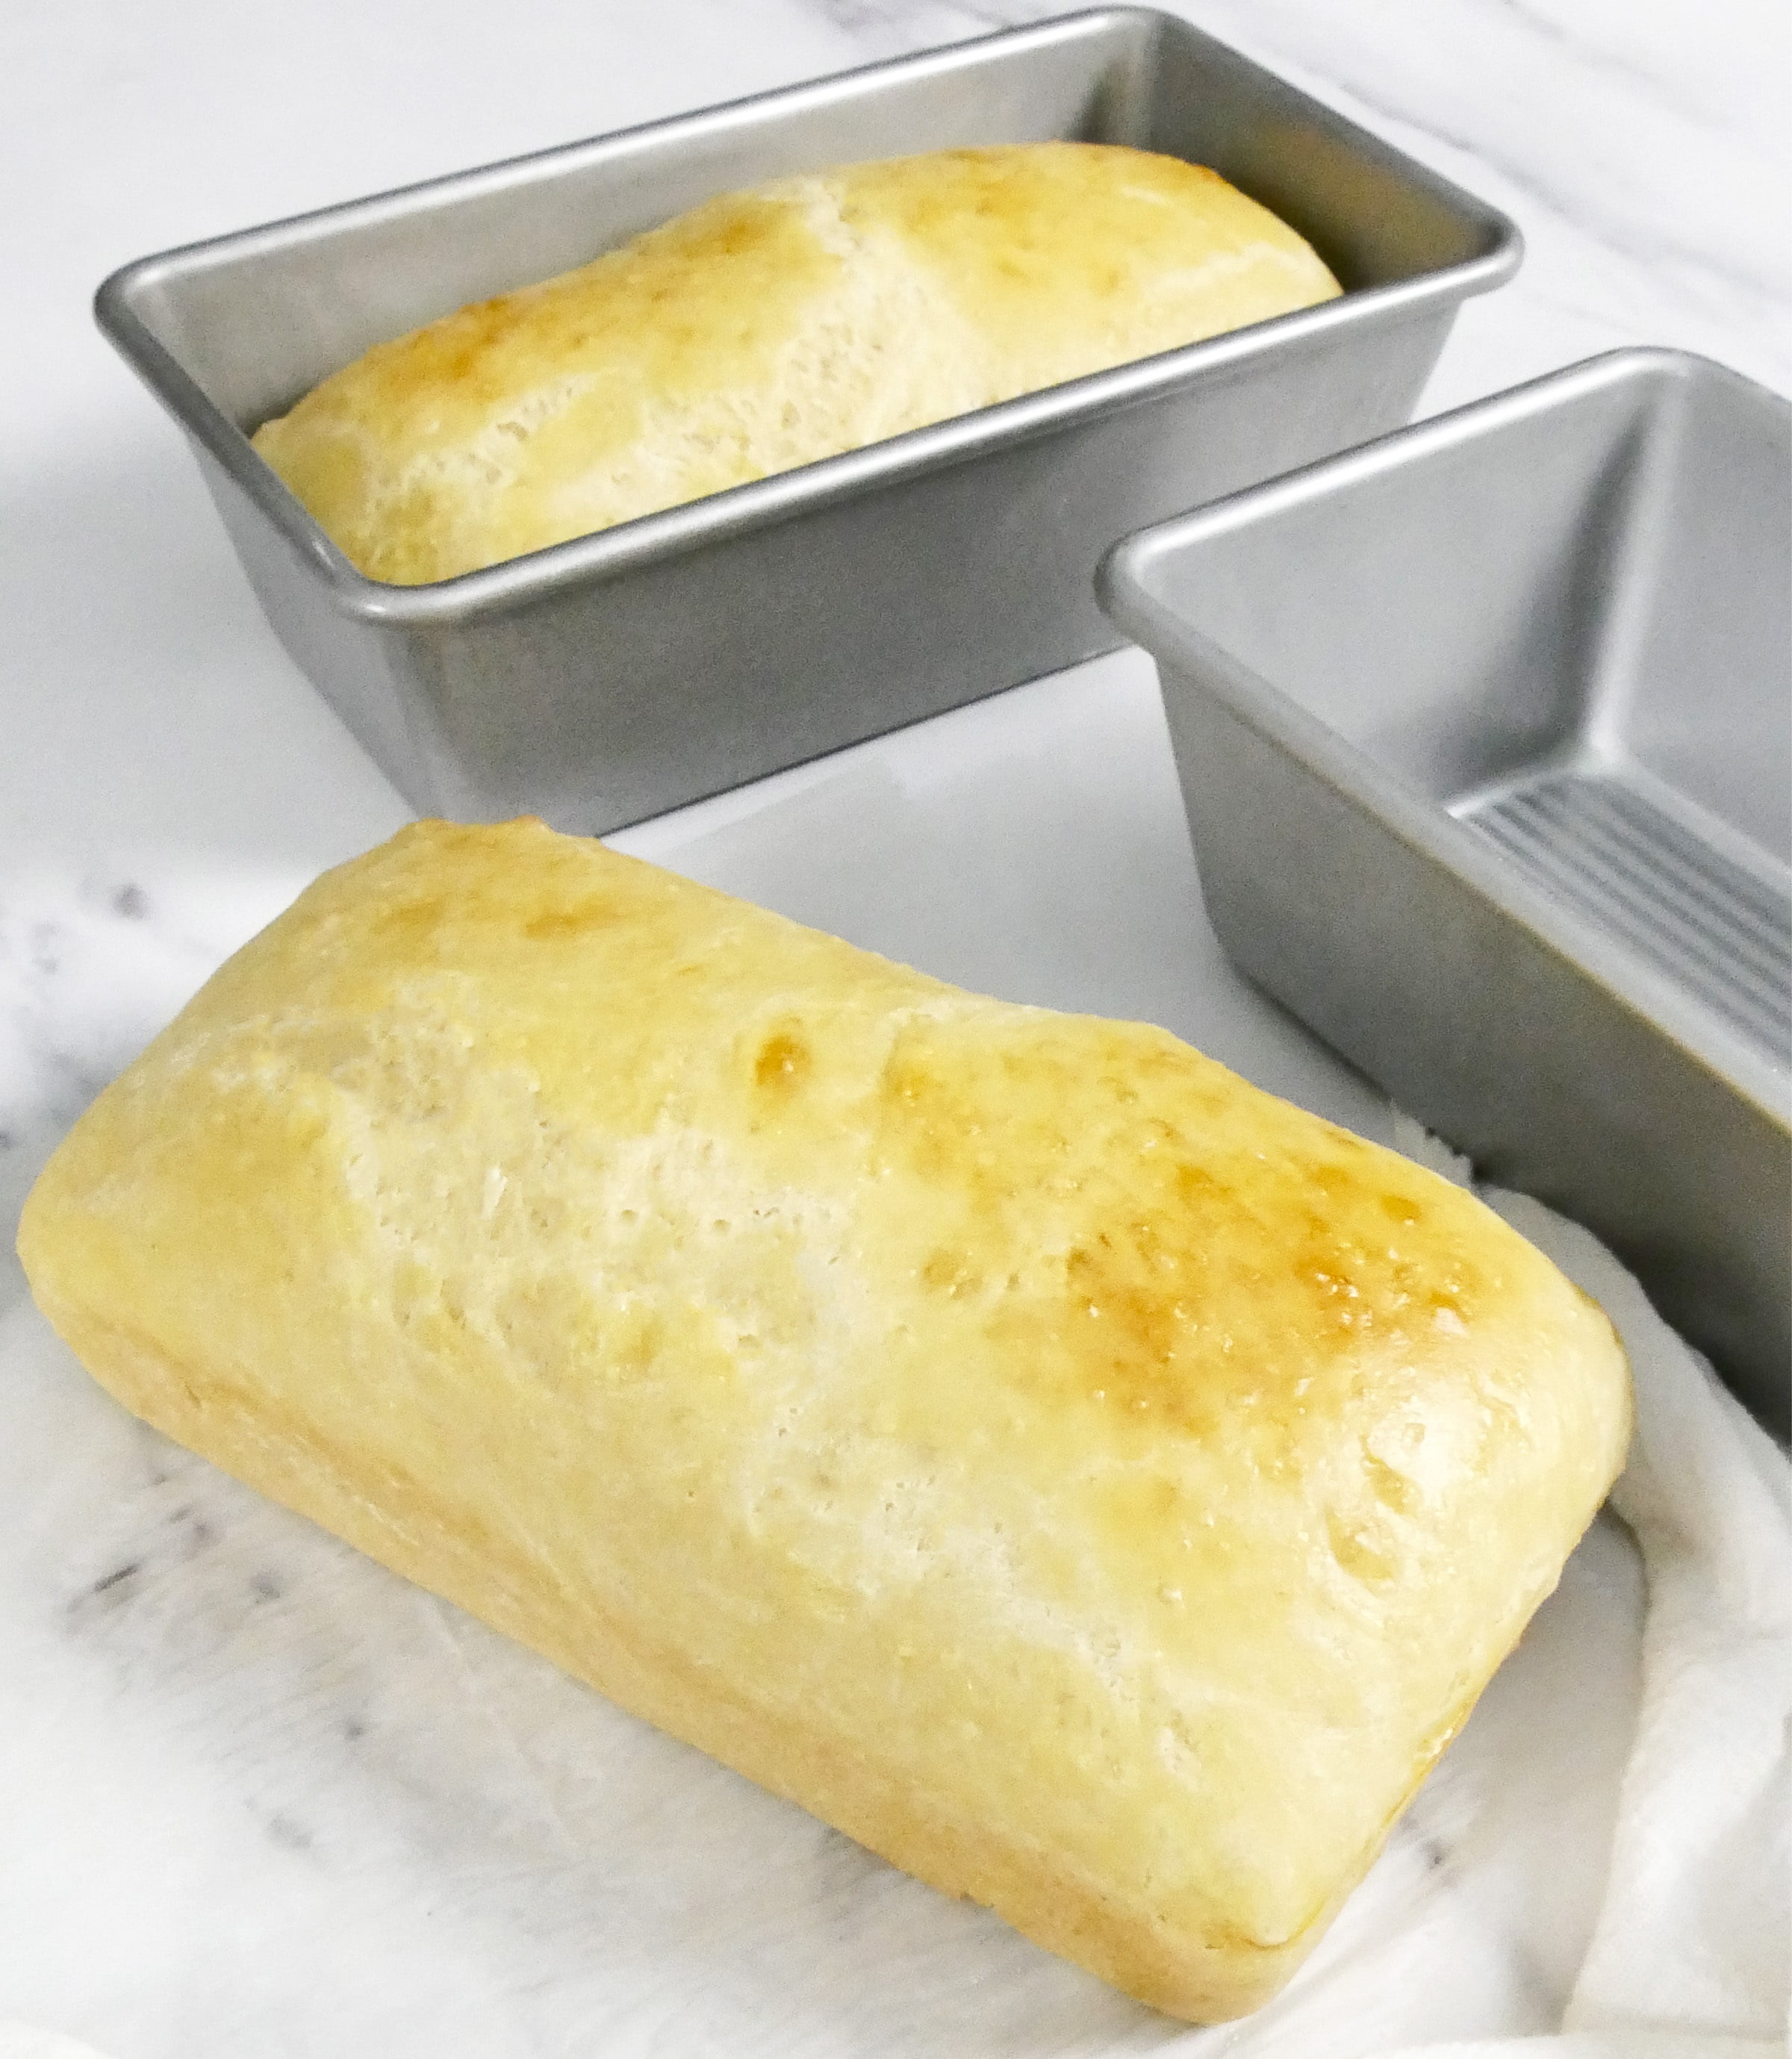  USA Pan Nonstick Standard Bread Loaf Pan, 1 Pound, Aluminized  Steel: Bread Pans: Home & Kitchen